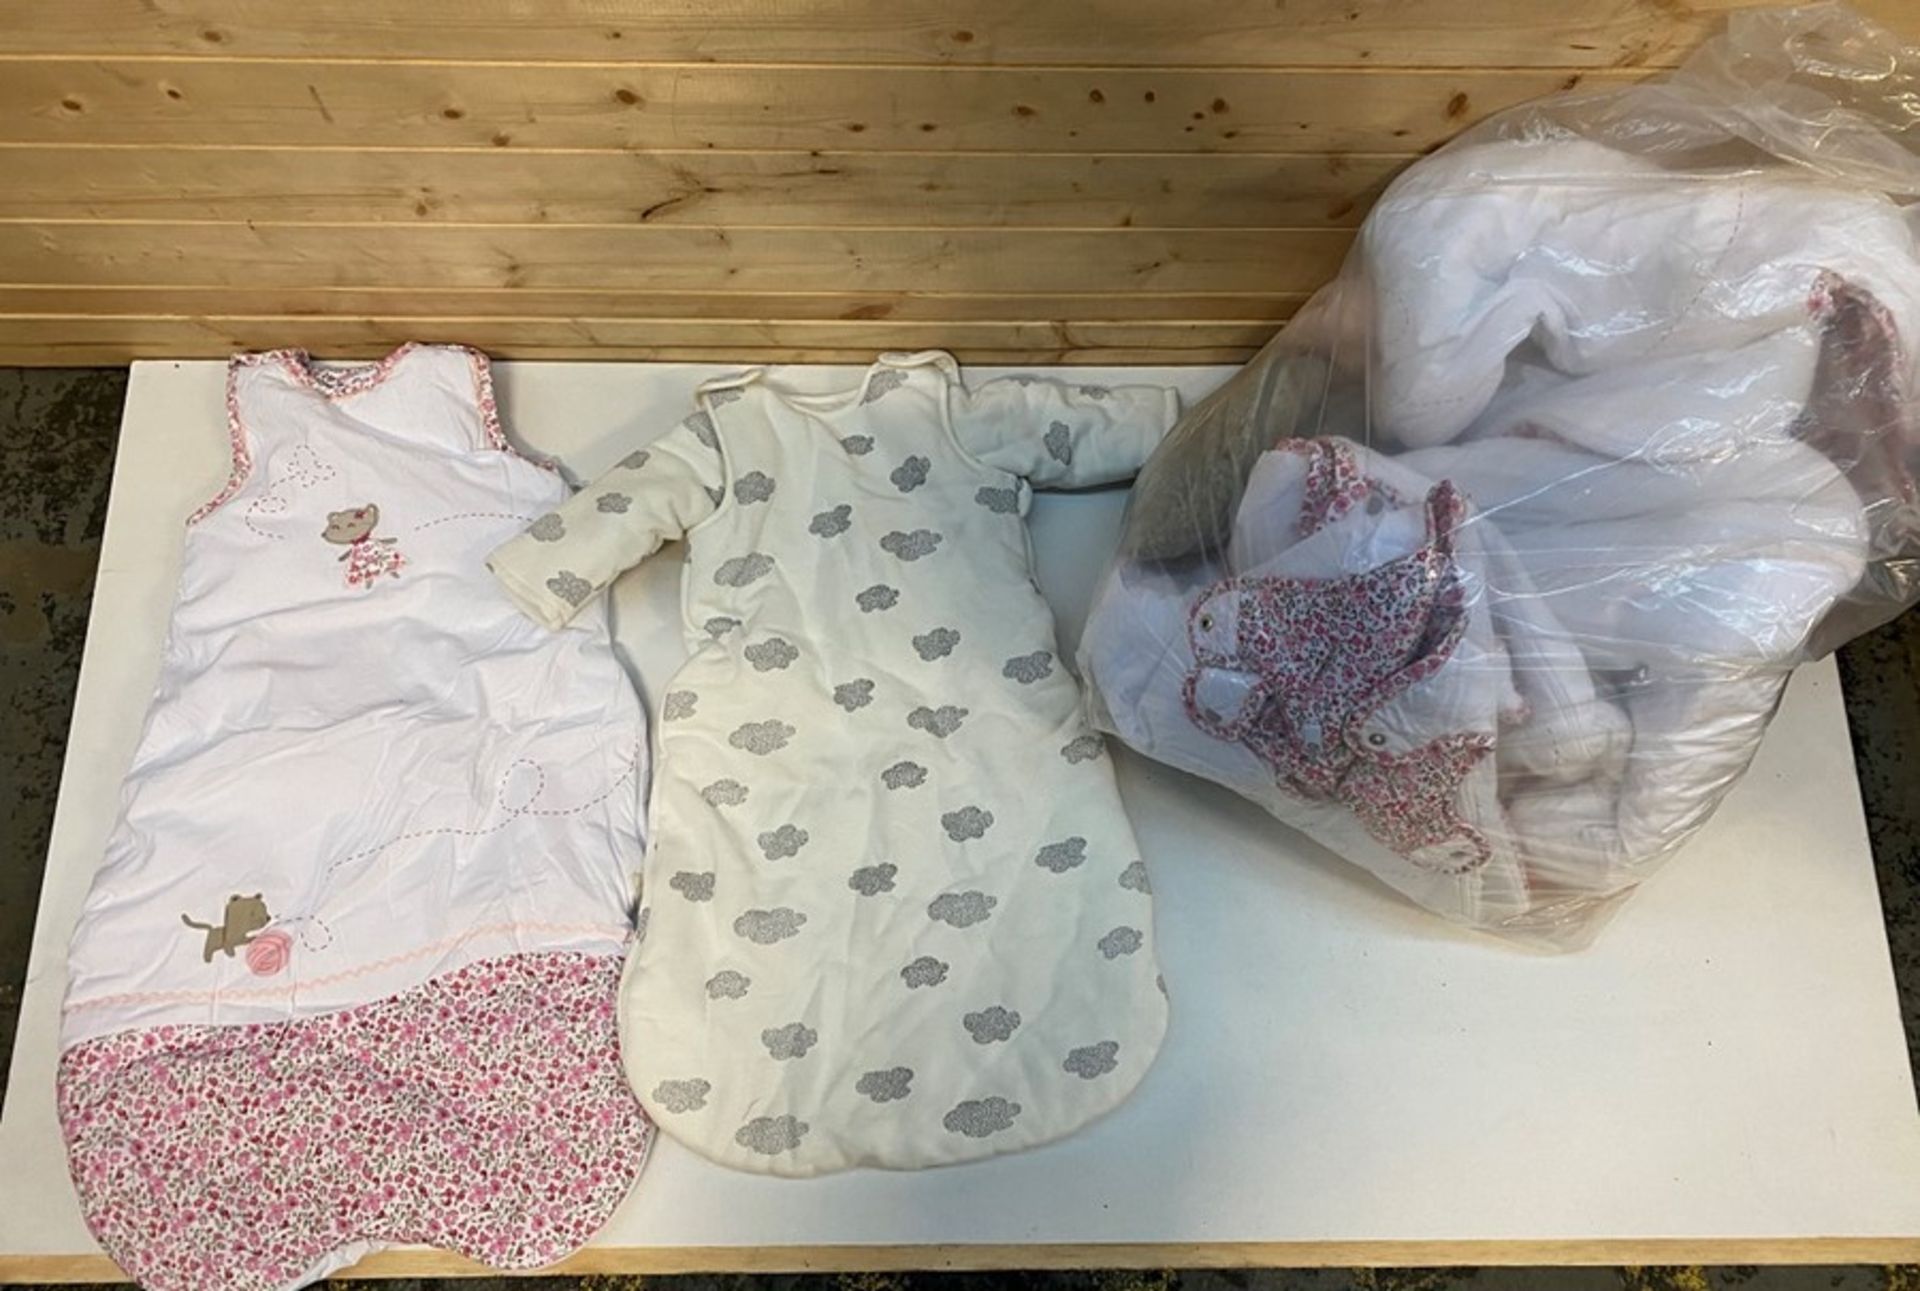 1 LOT TO CONTAIN 9 PIECES OF ASSORTED BABY GIRL'S SLEEPING BAGS / SIZES, COLOURS AND CONDITIONS